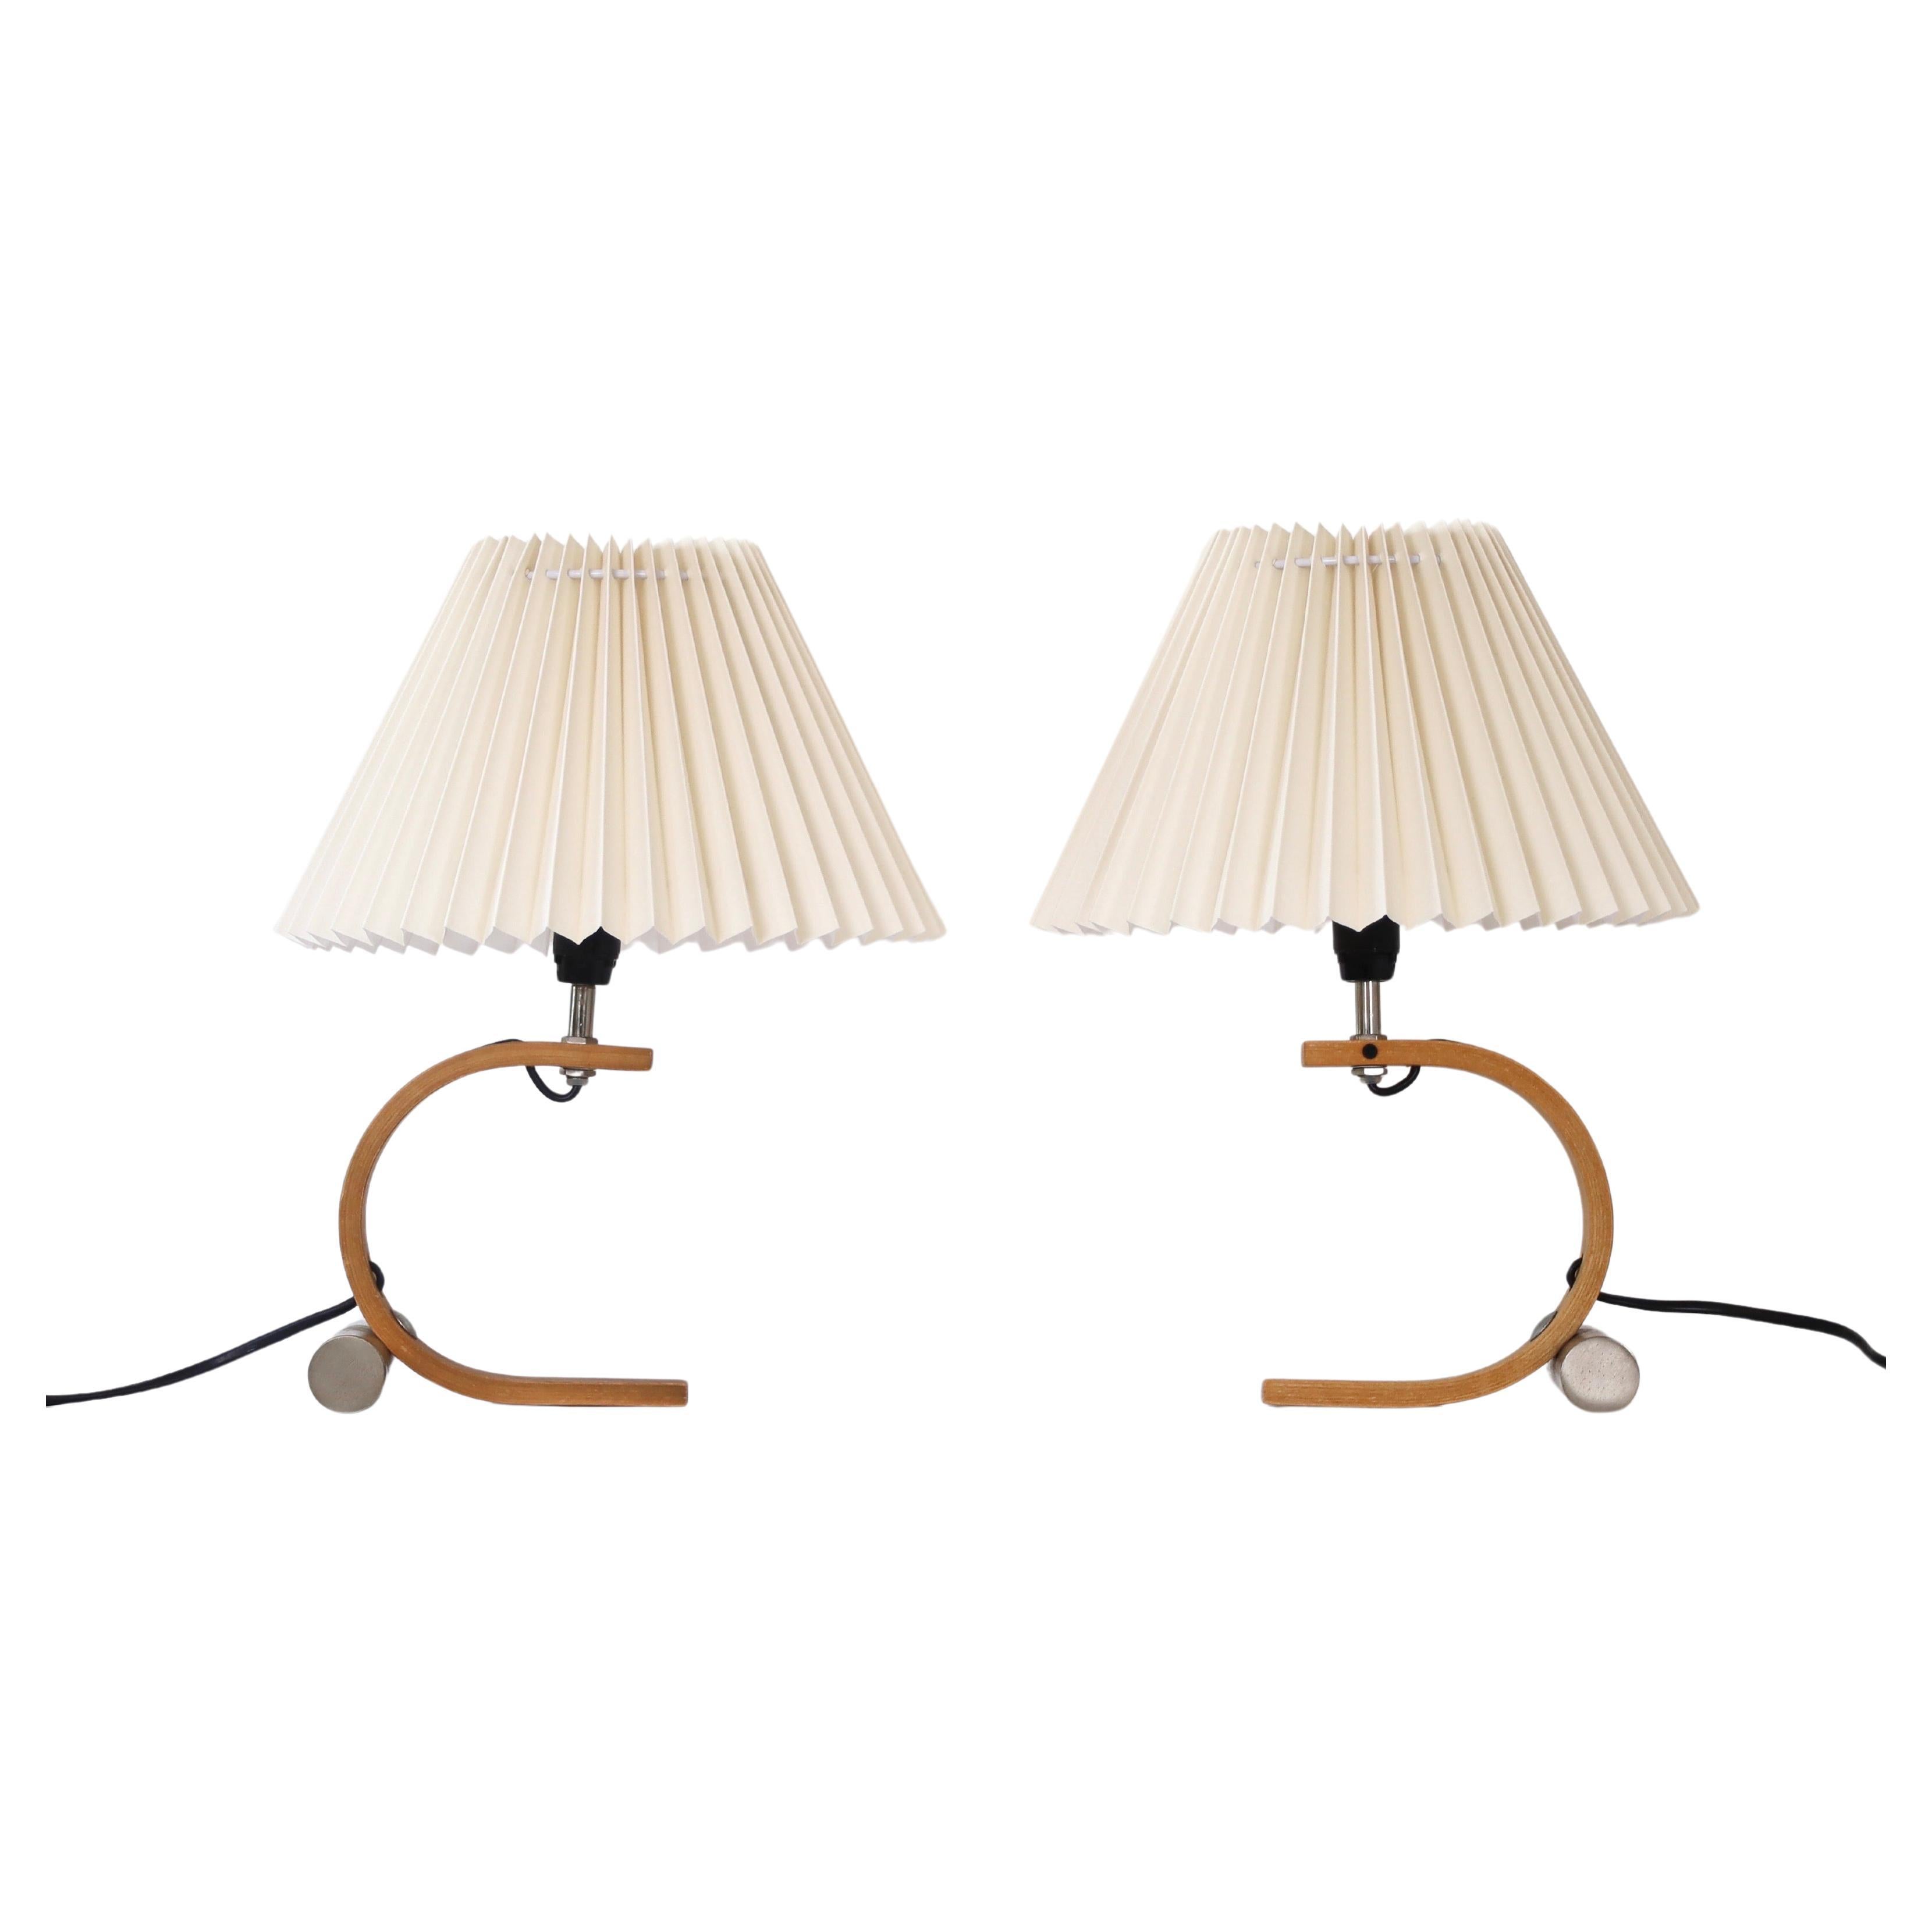 Set of Curvy Table Lamps in Beech wood by Caprani, 1970s, Denmark